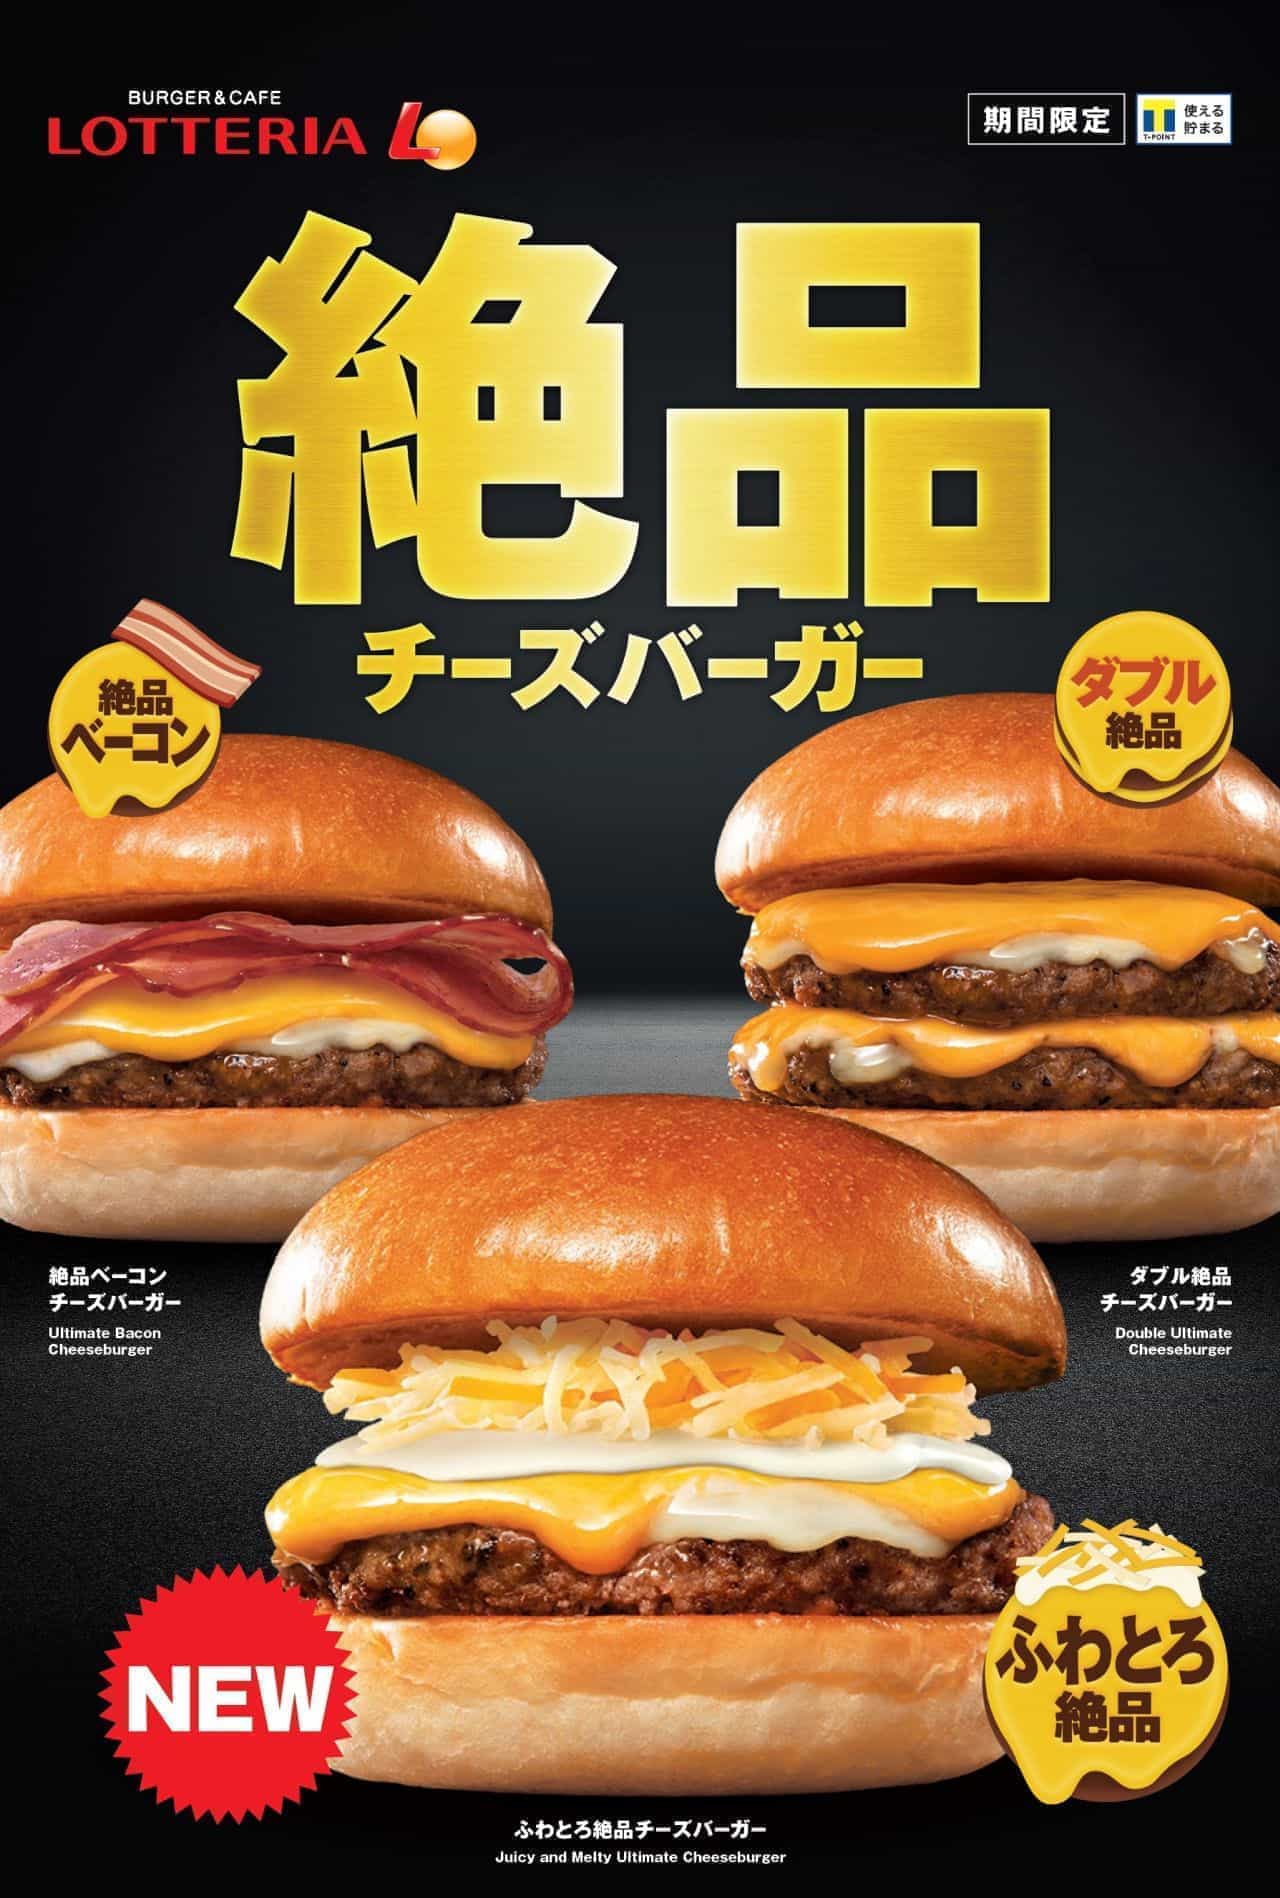 Lotteria "Fluffy Thick Zested Cheeseburger".